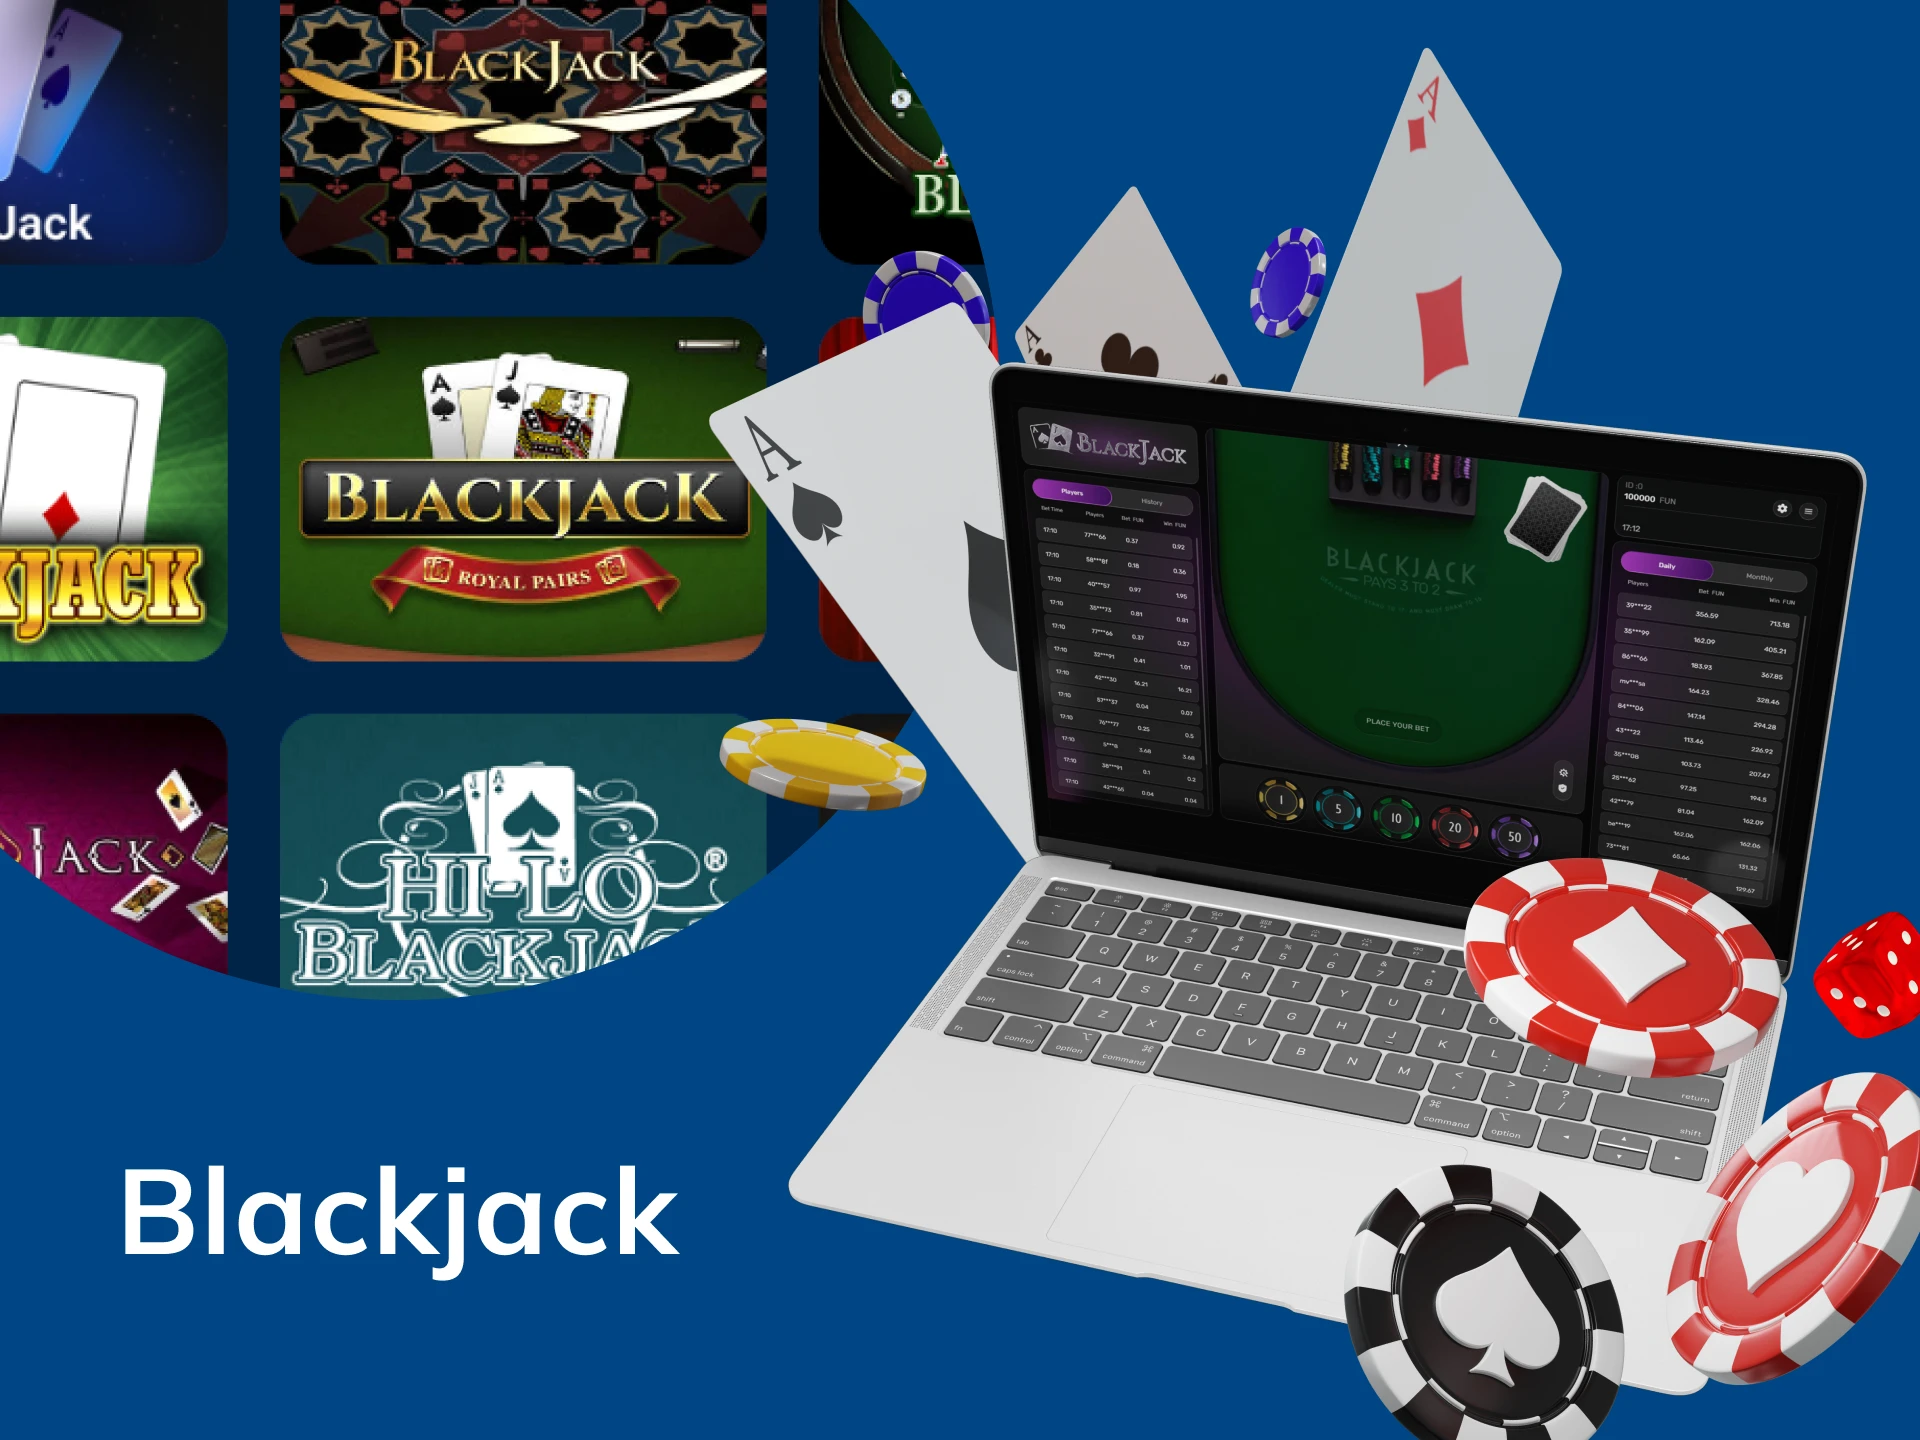 The traditional card game of blackjack is one of the best casino games.